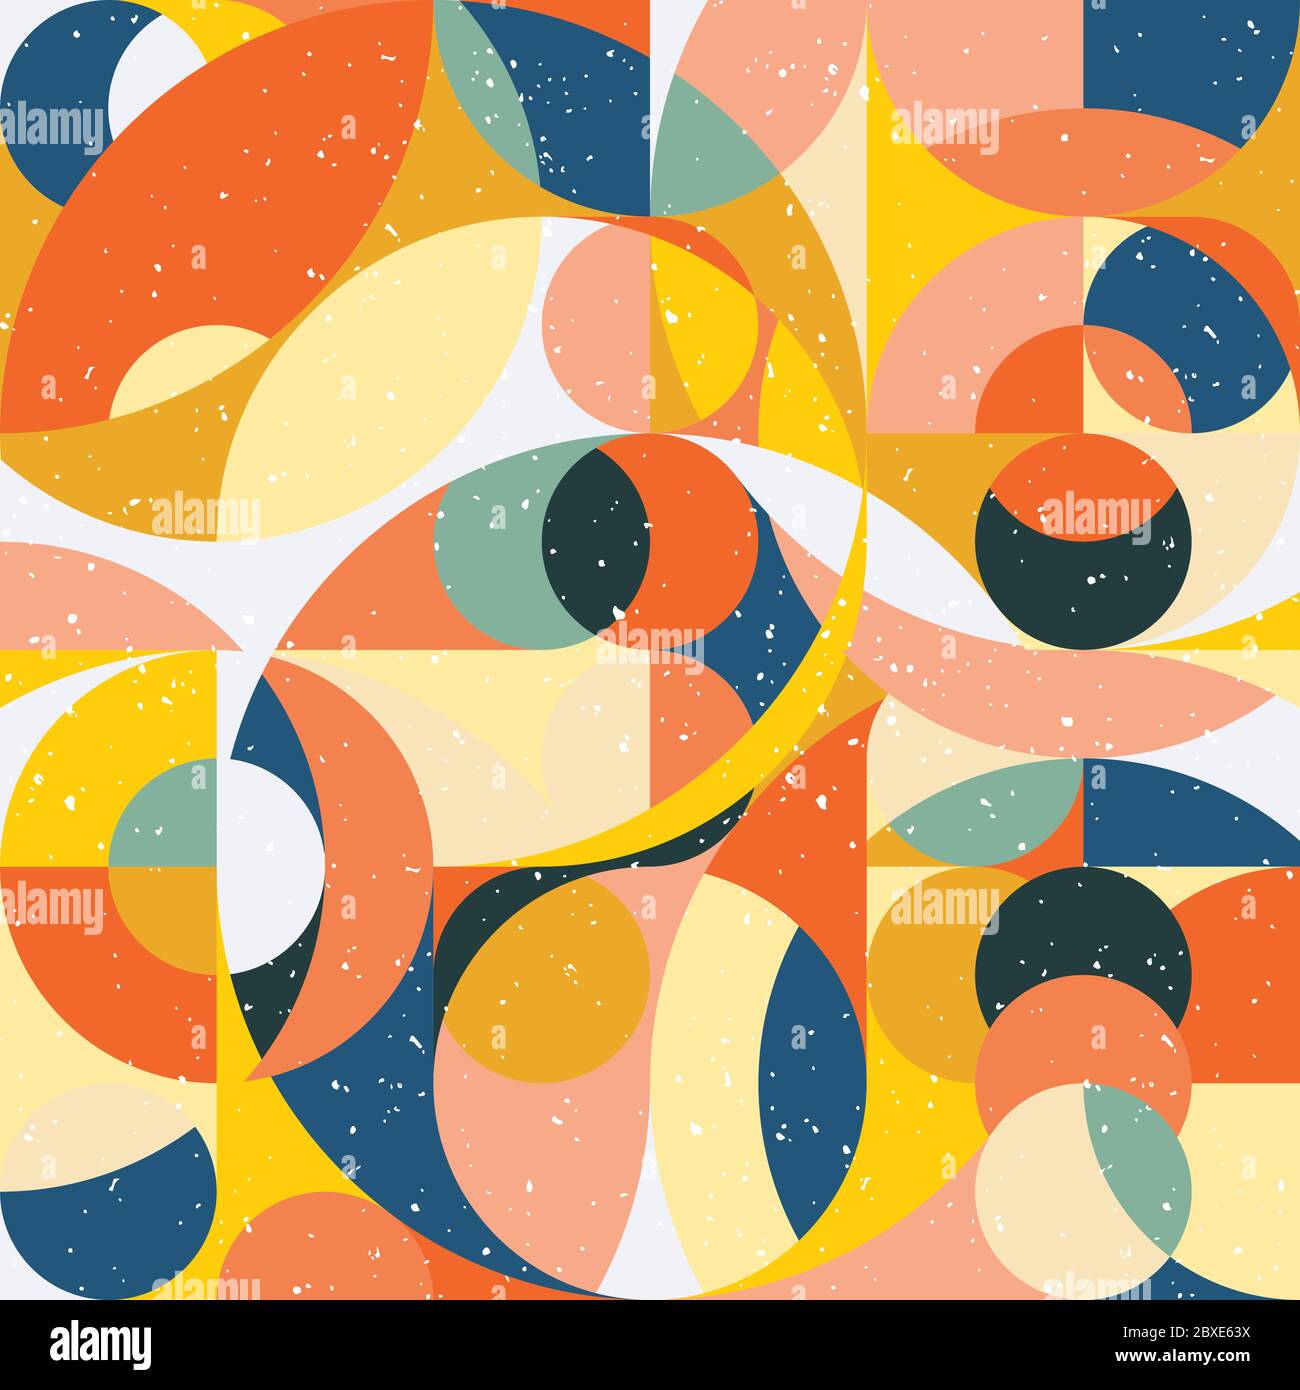 Seamless pattern in geometric pop style 70s. Abstract colorful